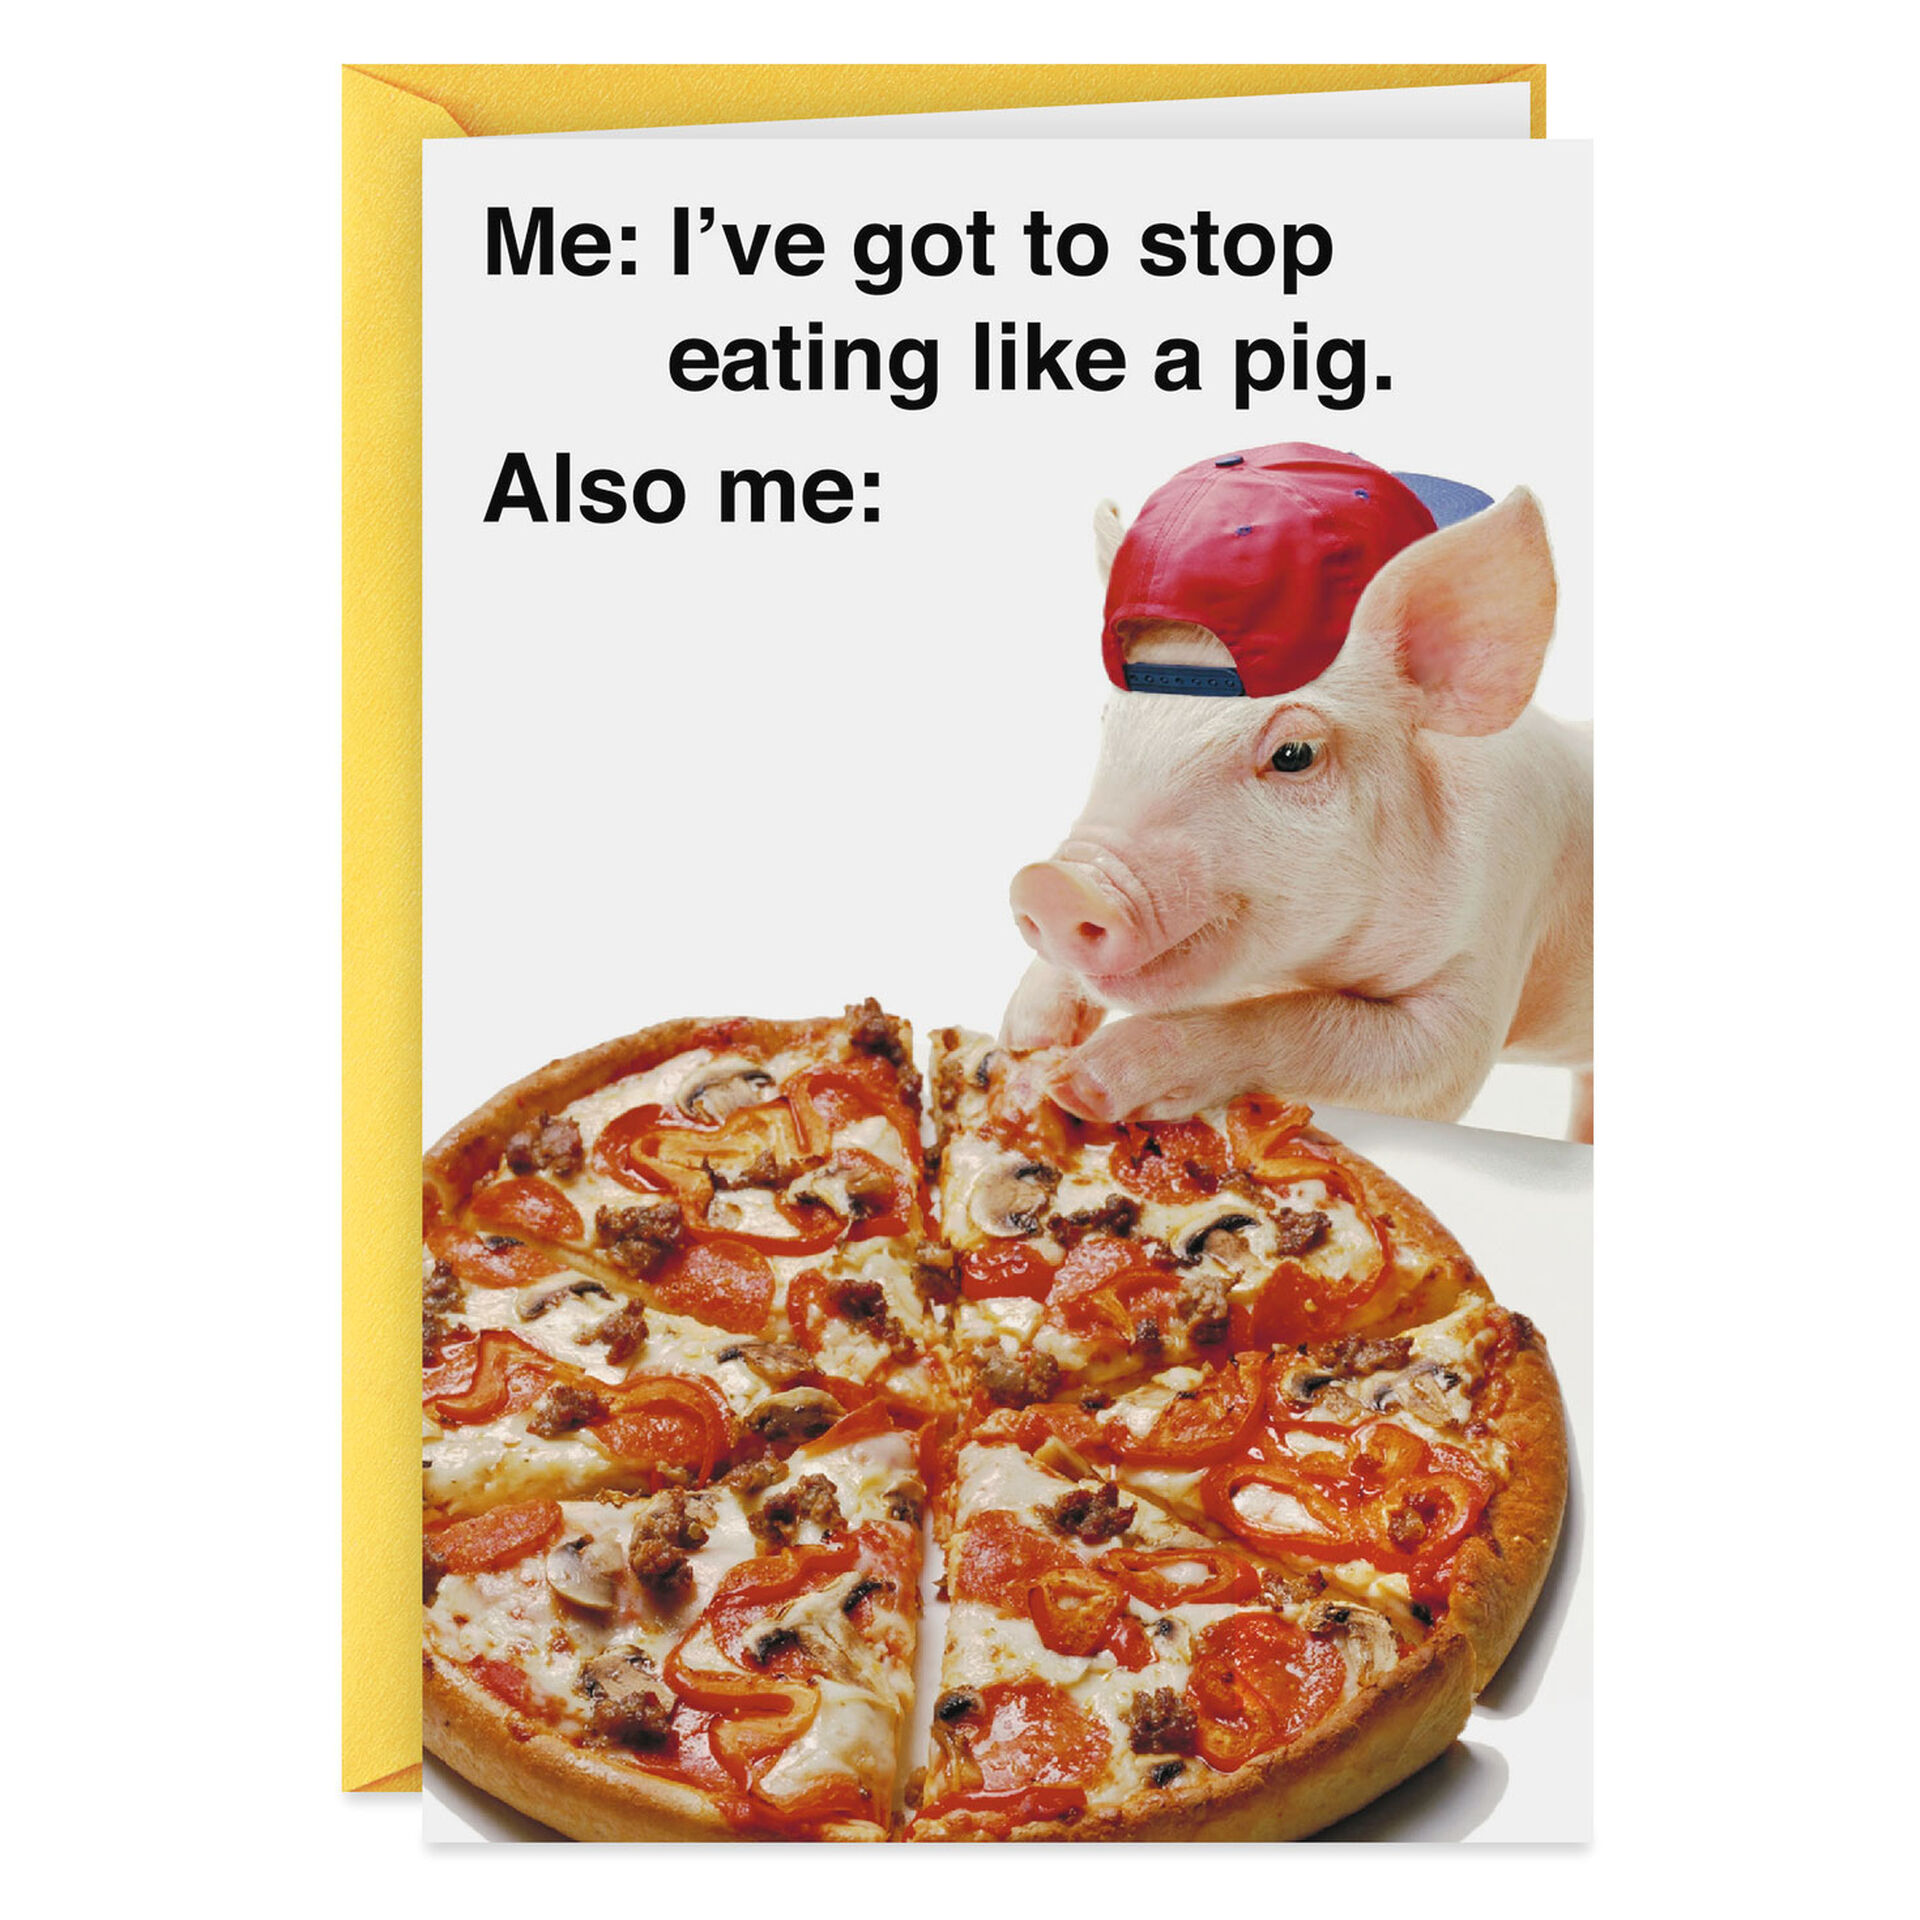 Pig-Eating-Pizza-Meme-Funny-Birthday-Card_369ZZB8863_01